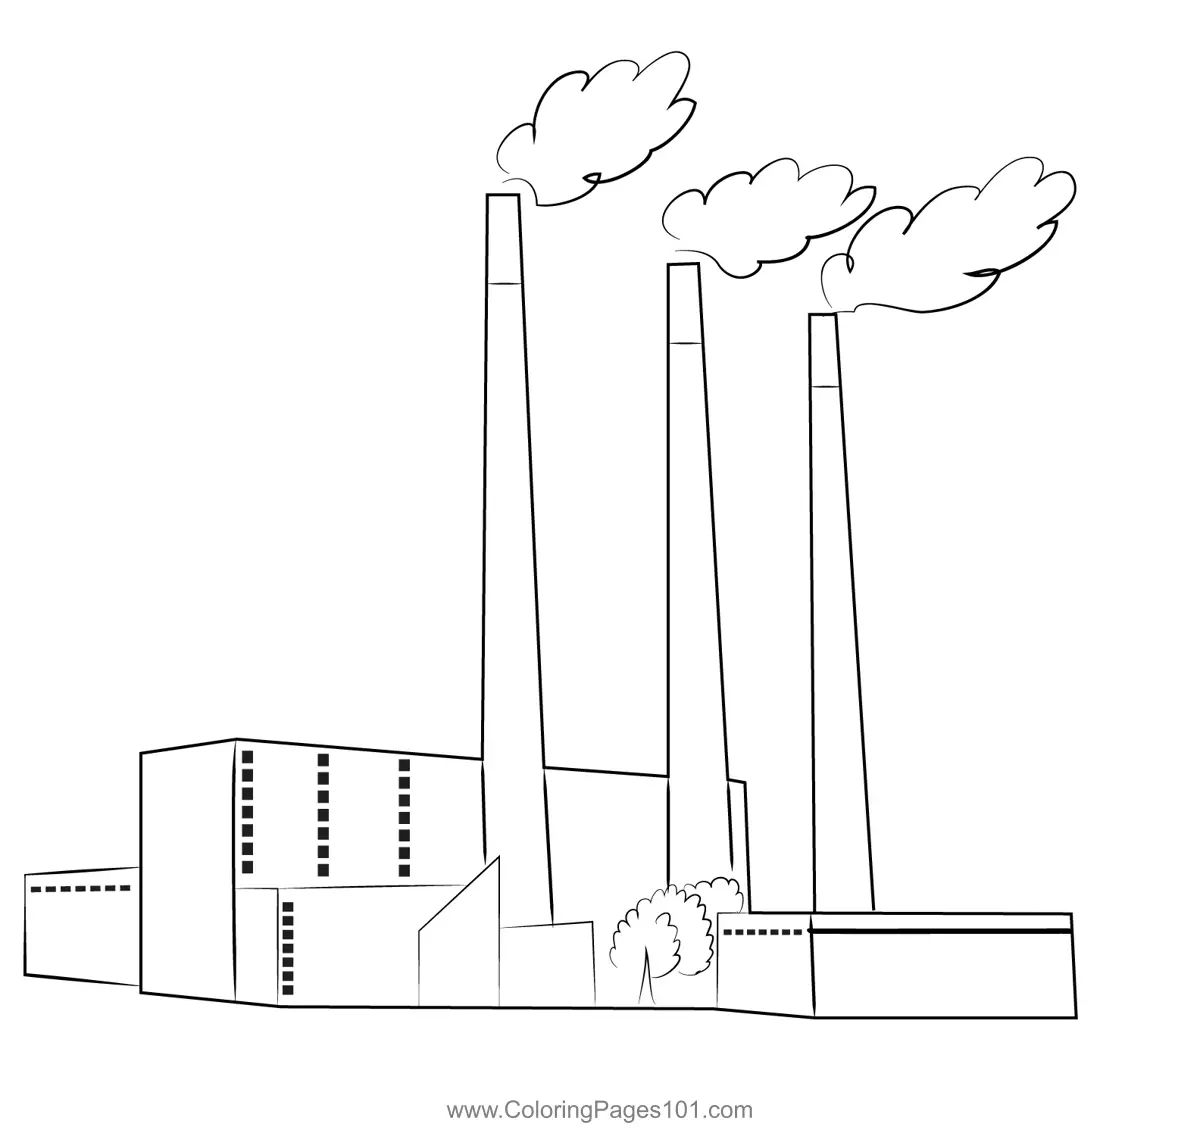 Coal Power Plant Coloring Page for Kids - Free Power Plants Printable ...